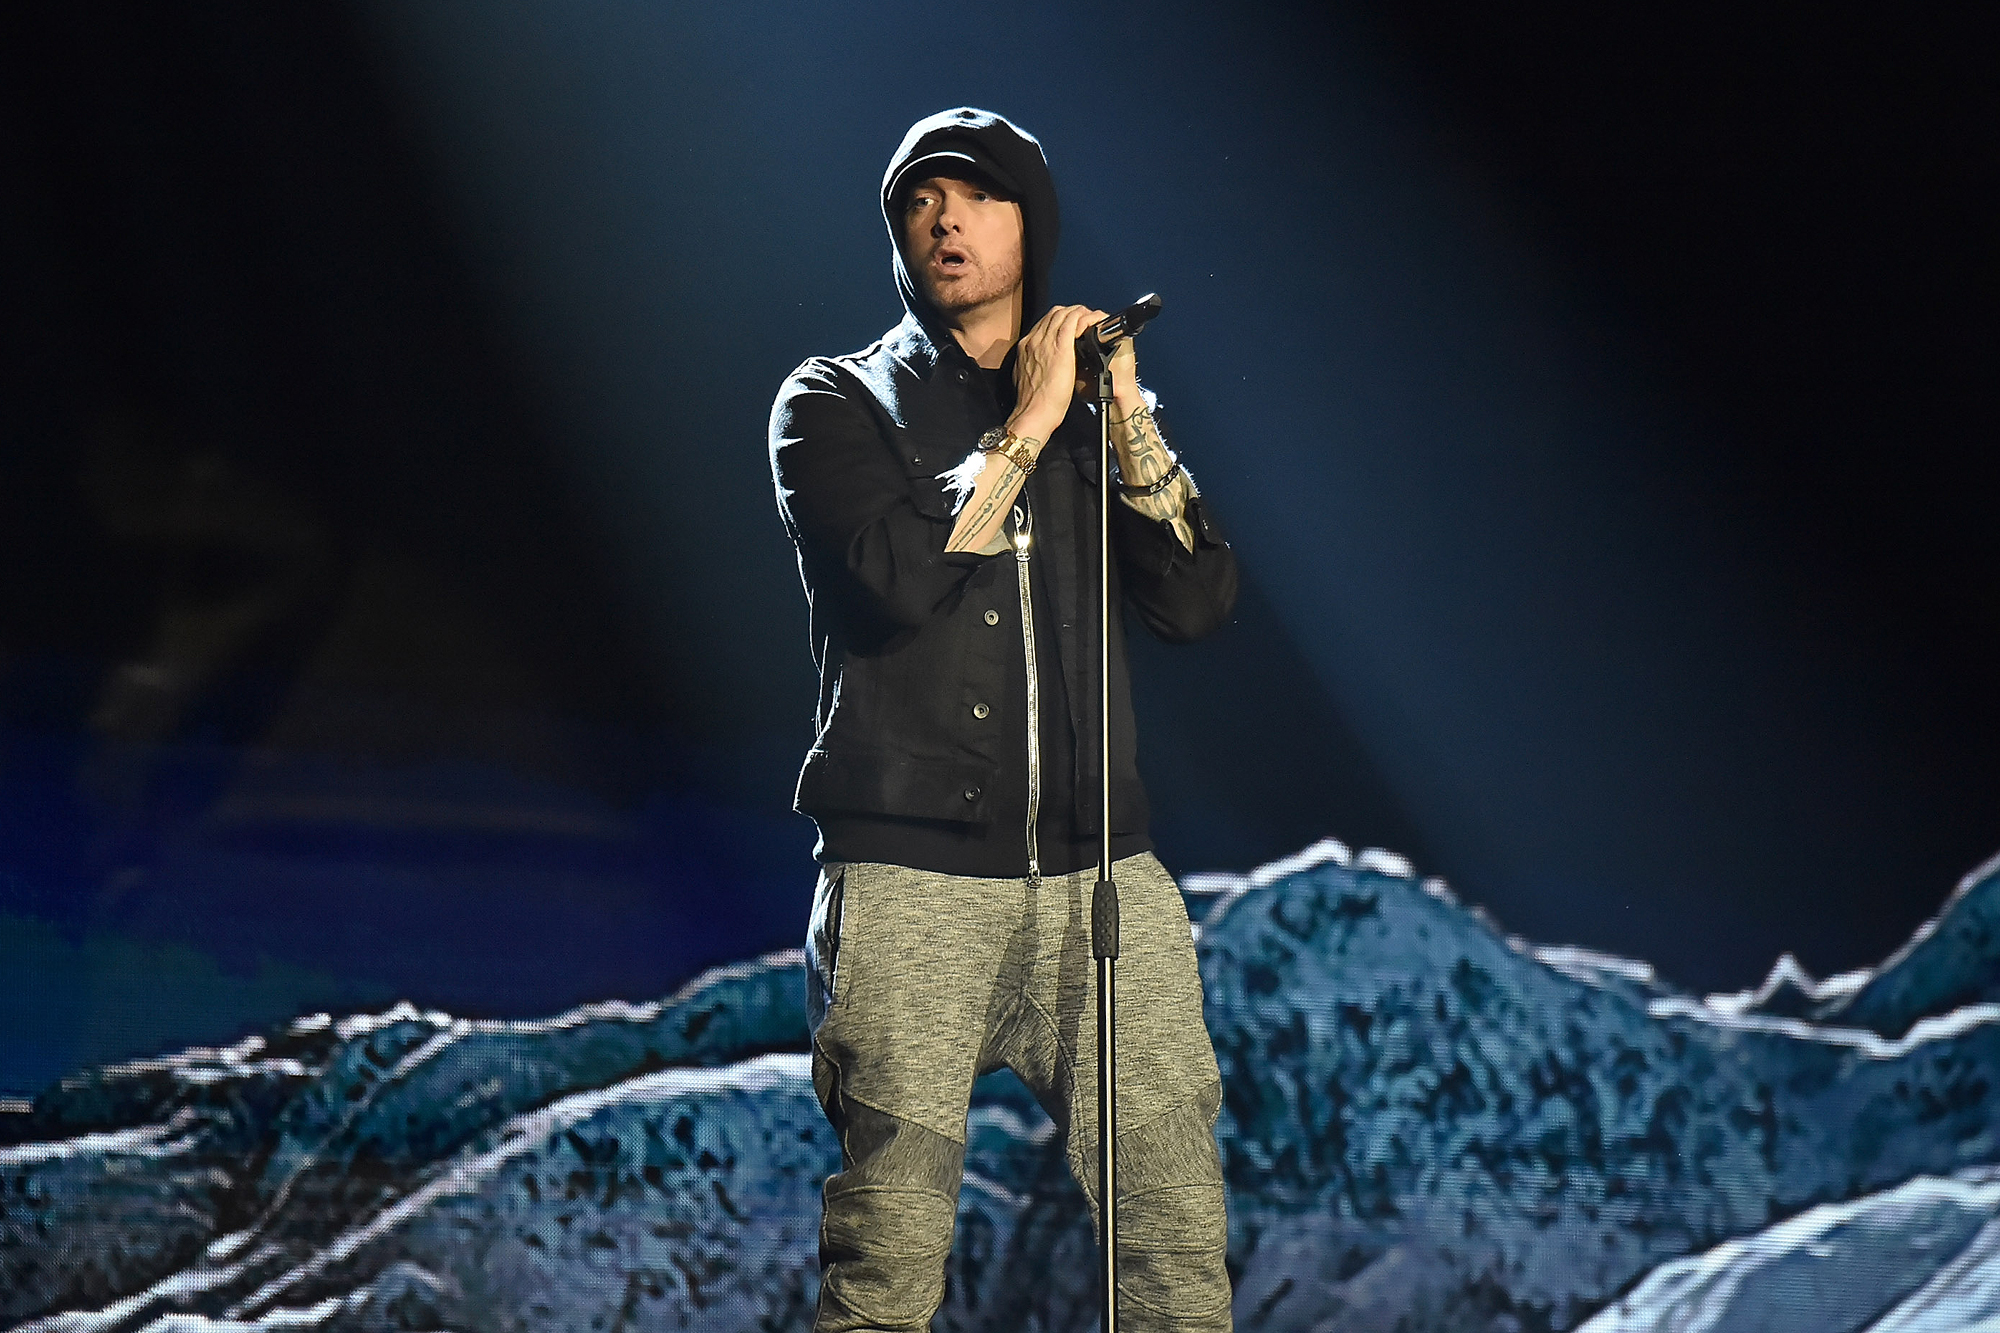 Eminem Defends 'Music to Be Murdered By' in Open Letter